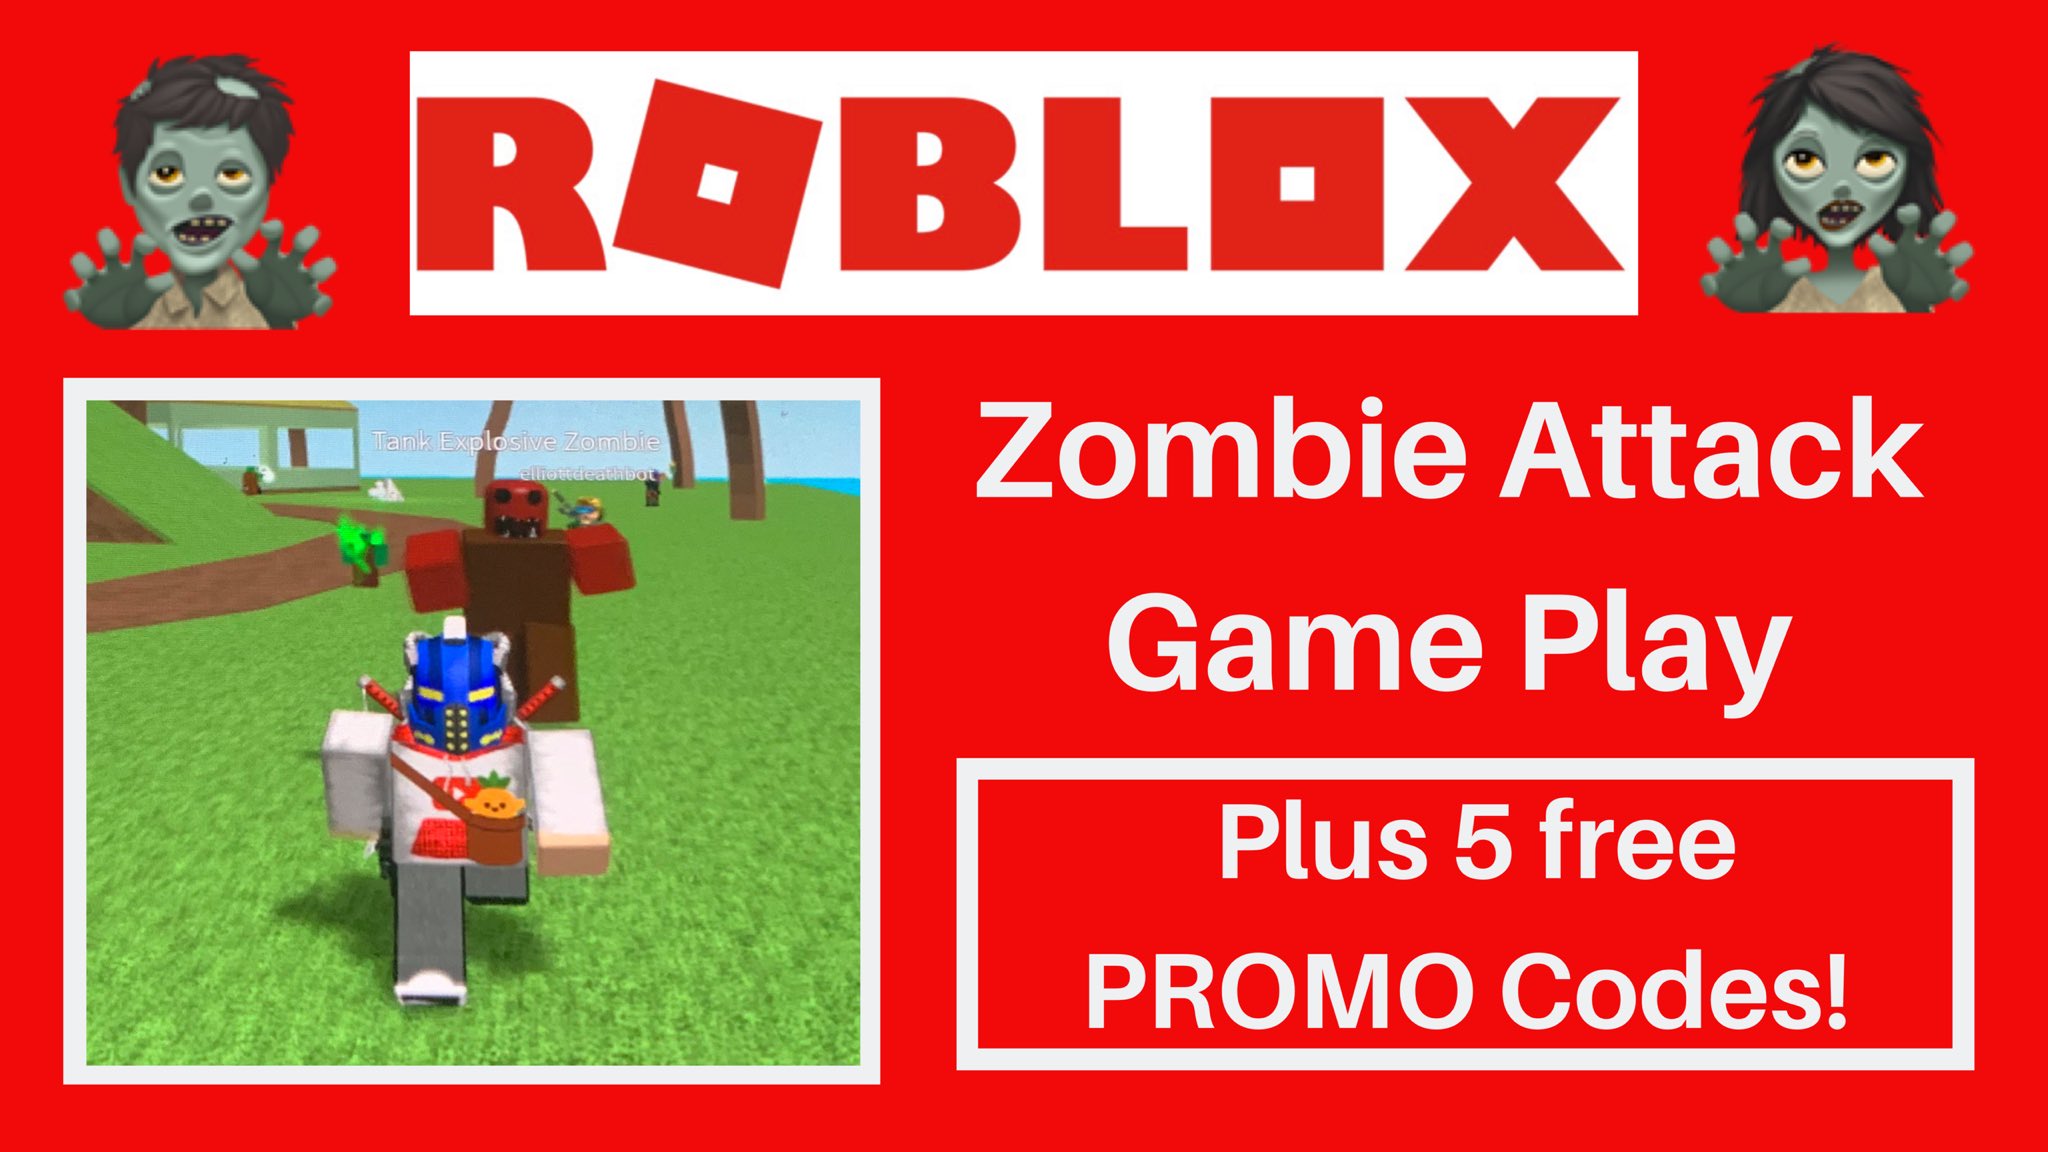 Deathbotbrothers On Twitter Roblox Promo Codes And Zombie Attack Game Play Get The Bat Pack Quick Https T Co Pcpntulako Via Youtube Roblox Robloxpromocodes Robloxcodes Robloxfreestuff Robloxzombieattack Https T Co 6t5idiia2k